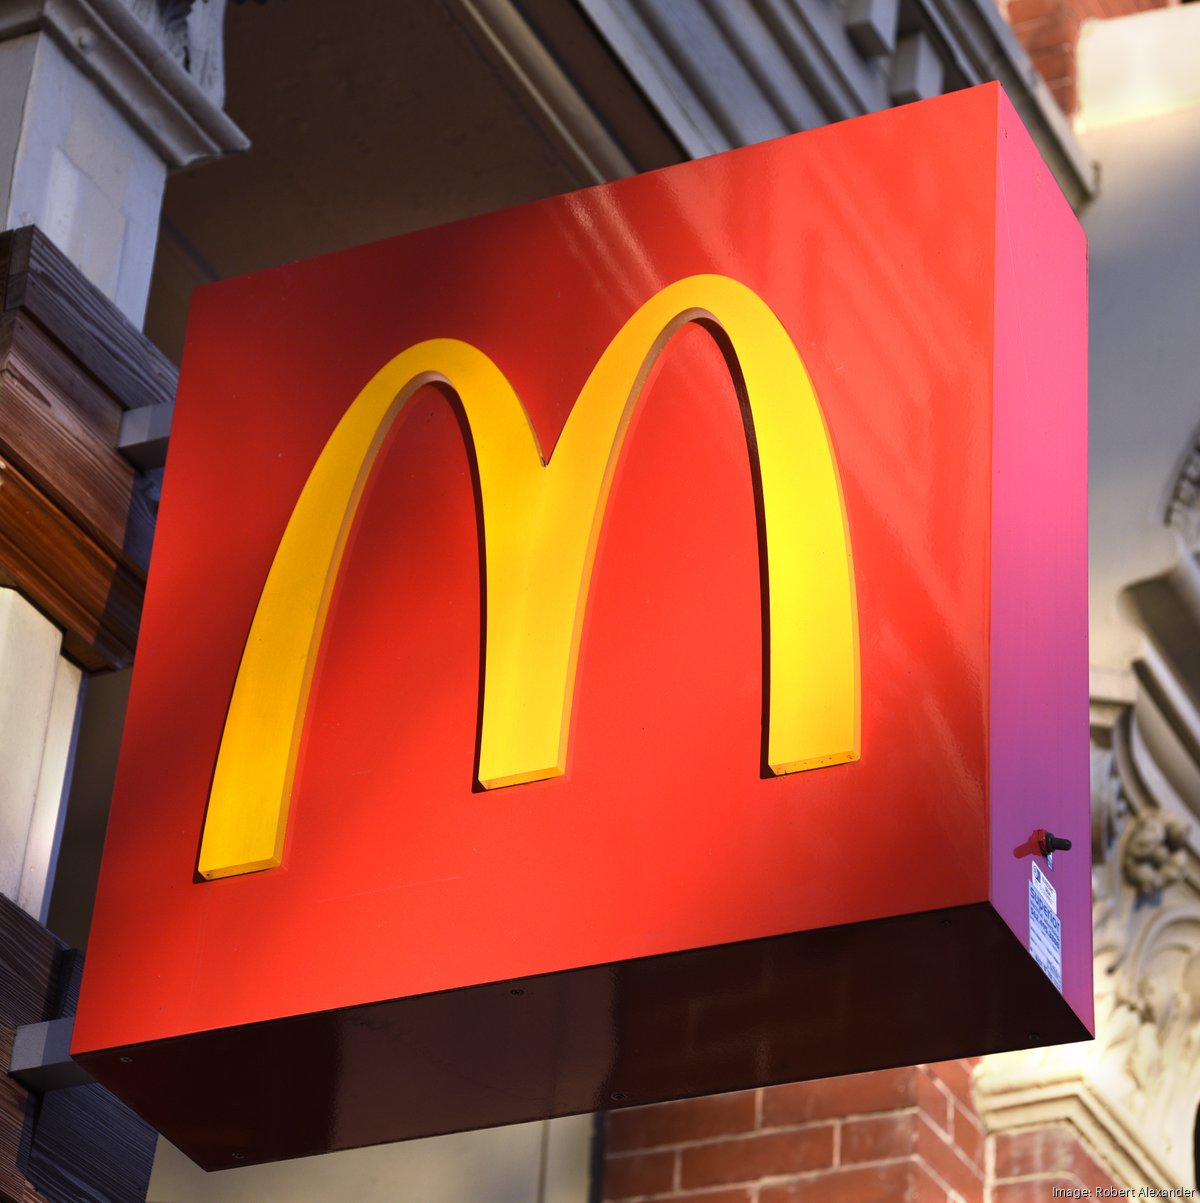 Chicago And DC Culinary Creators Partner With McDonalds To Create